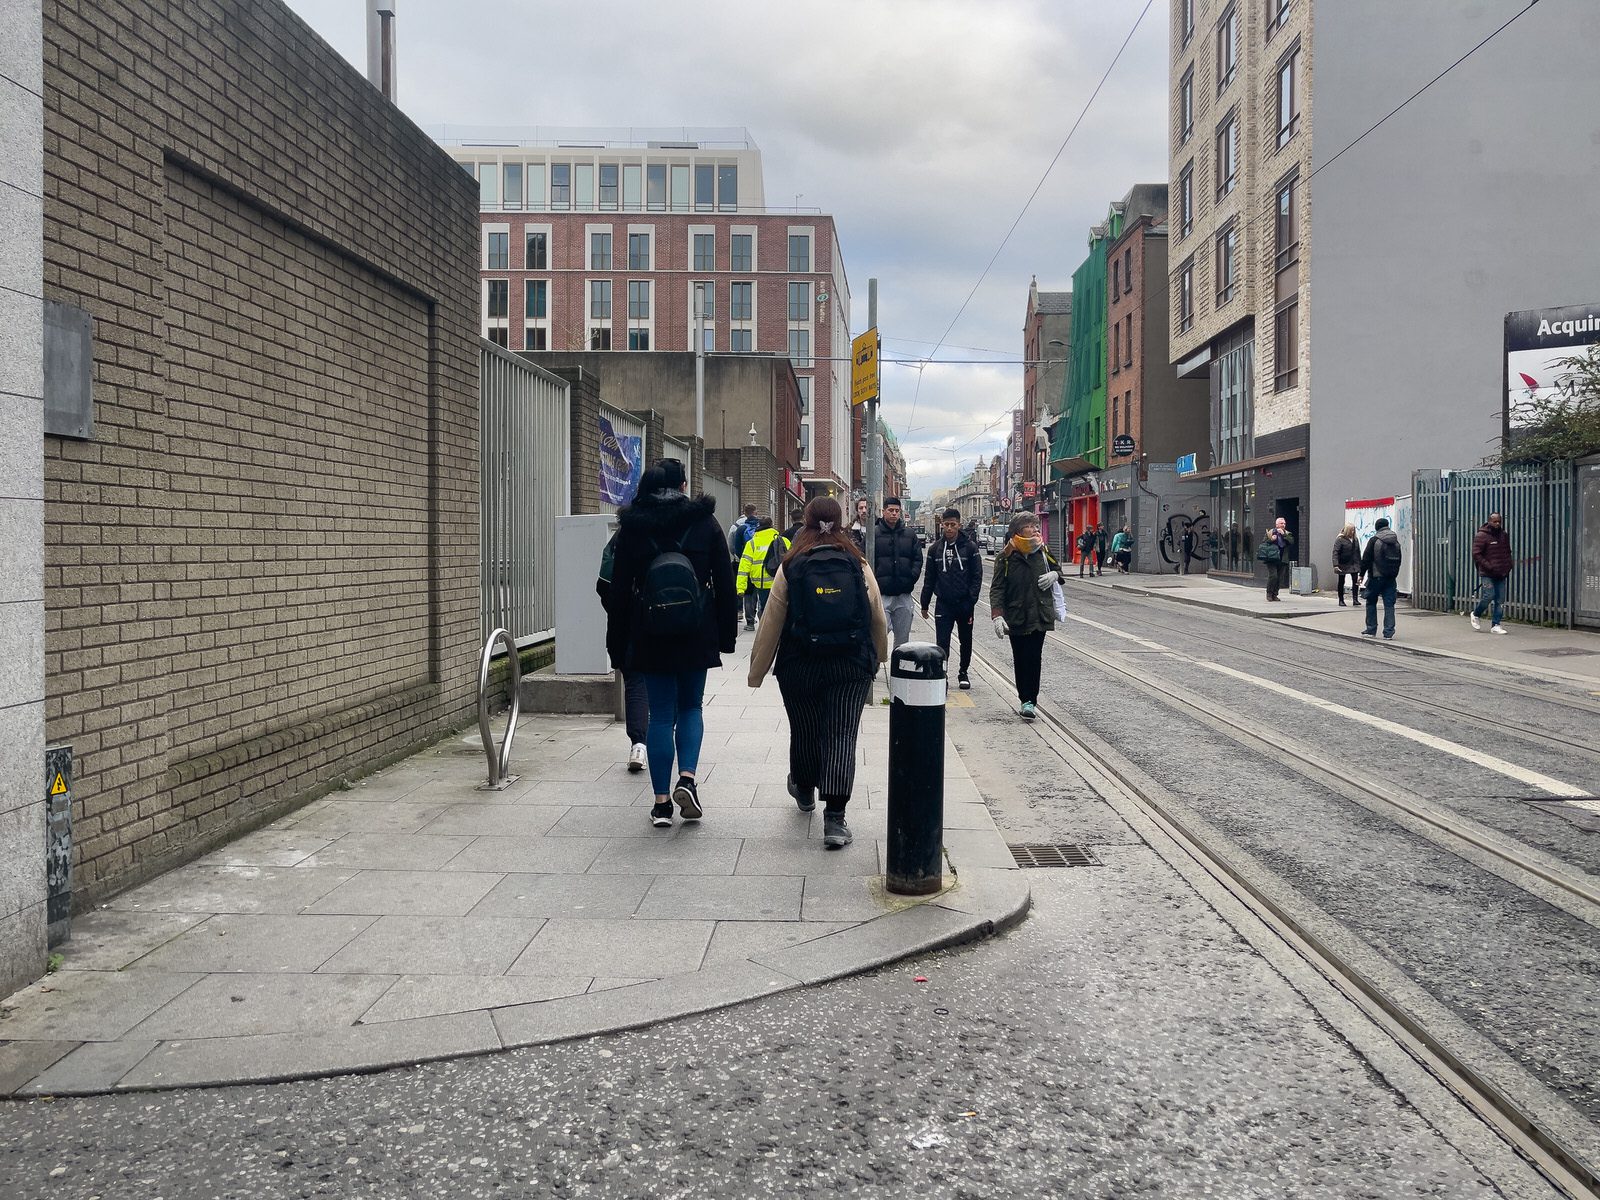 DUBLIN CITY CENTRE [THE DAY AFTER THE RIOT AND LITTLE TO SEE]-225273-1